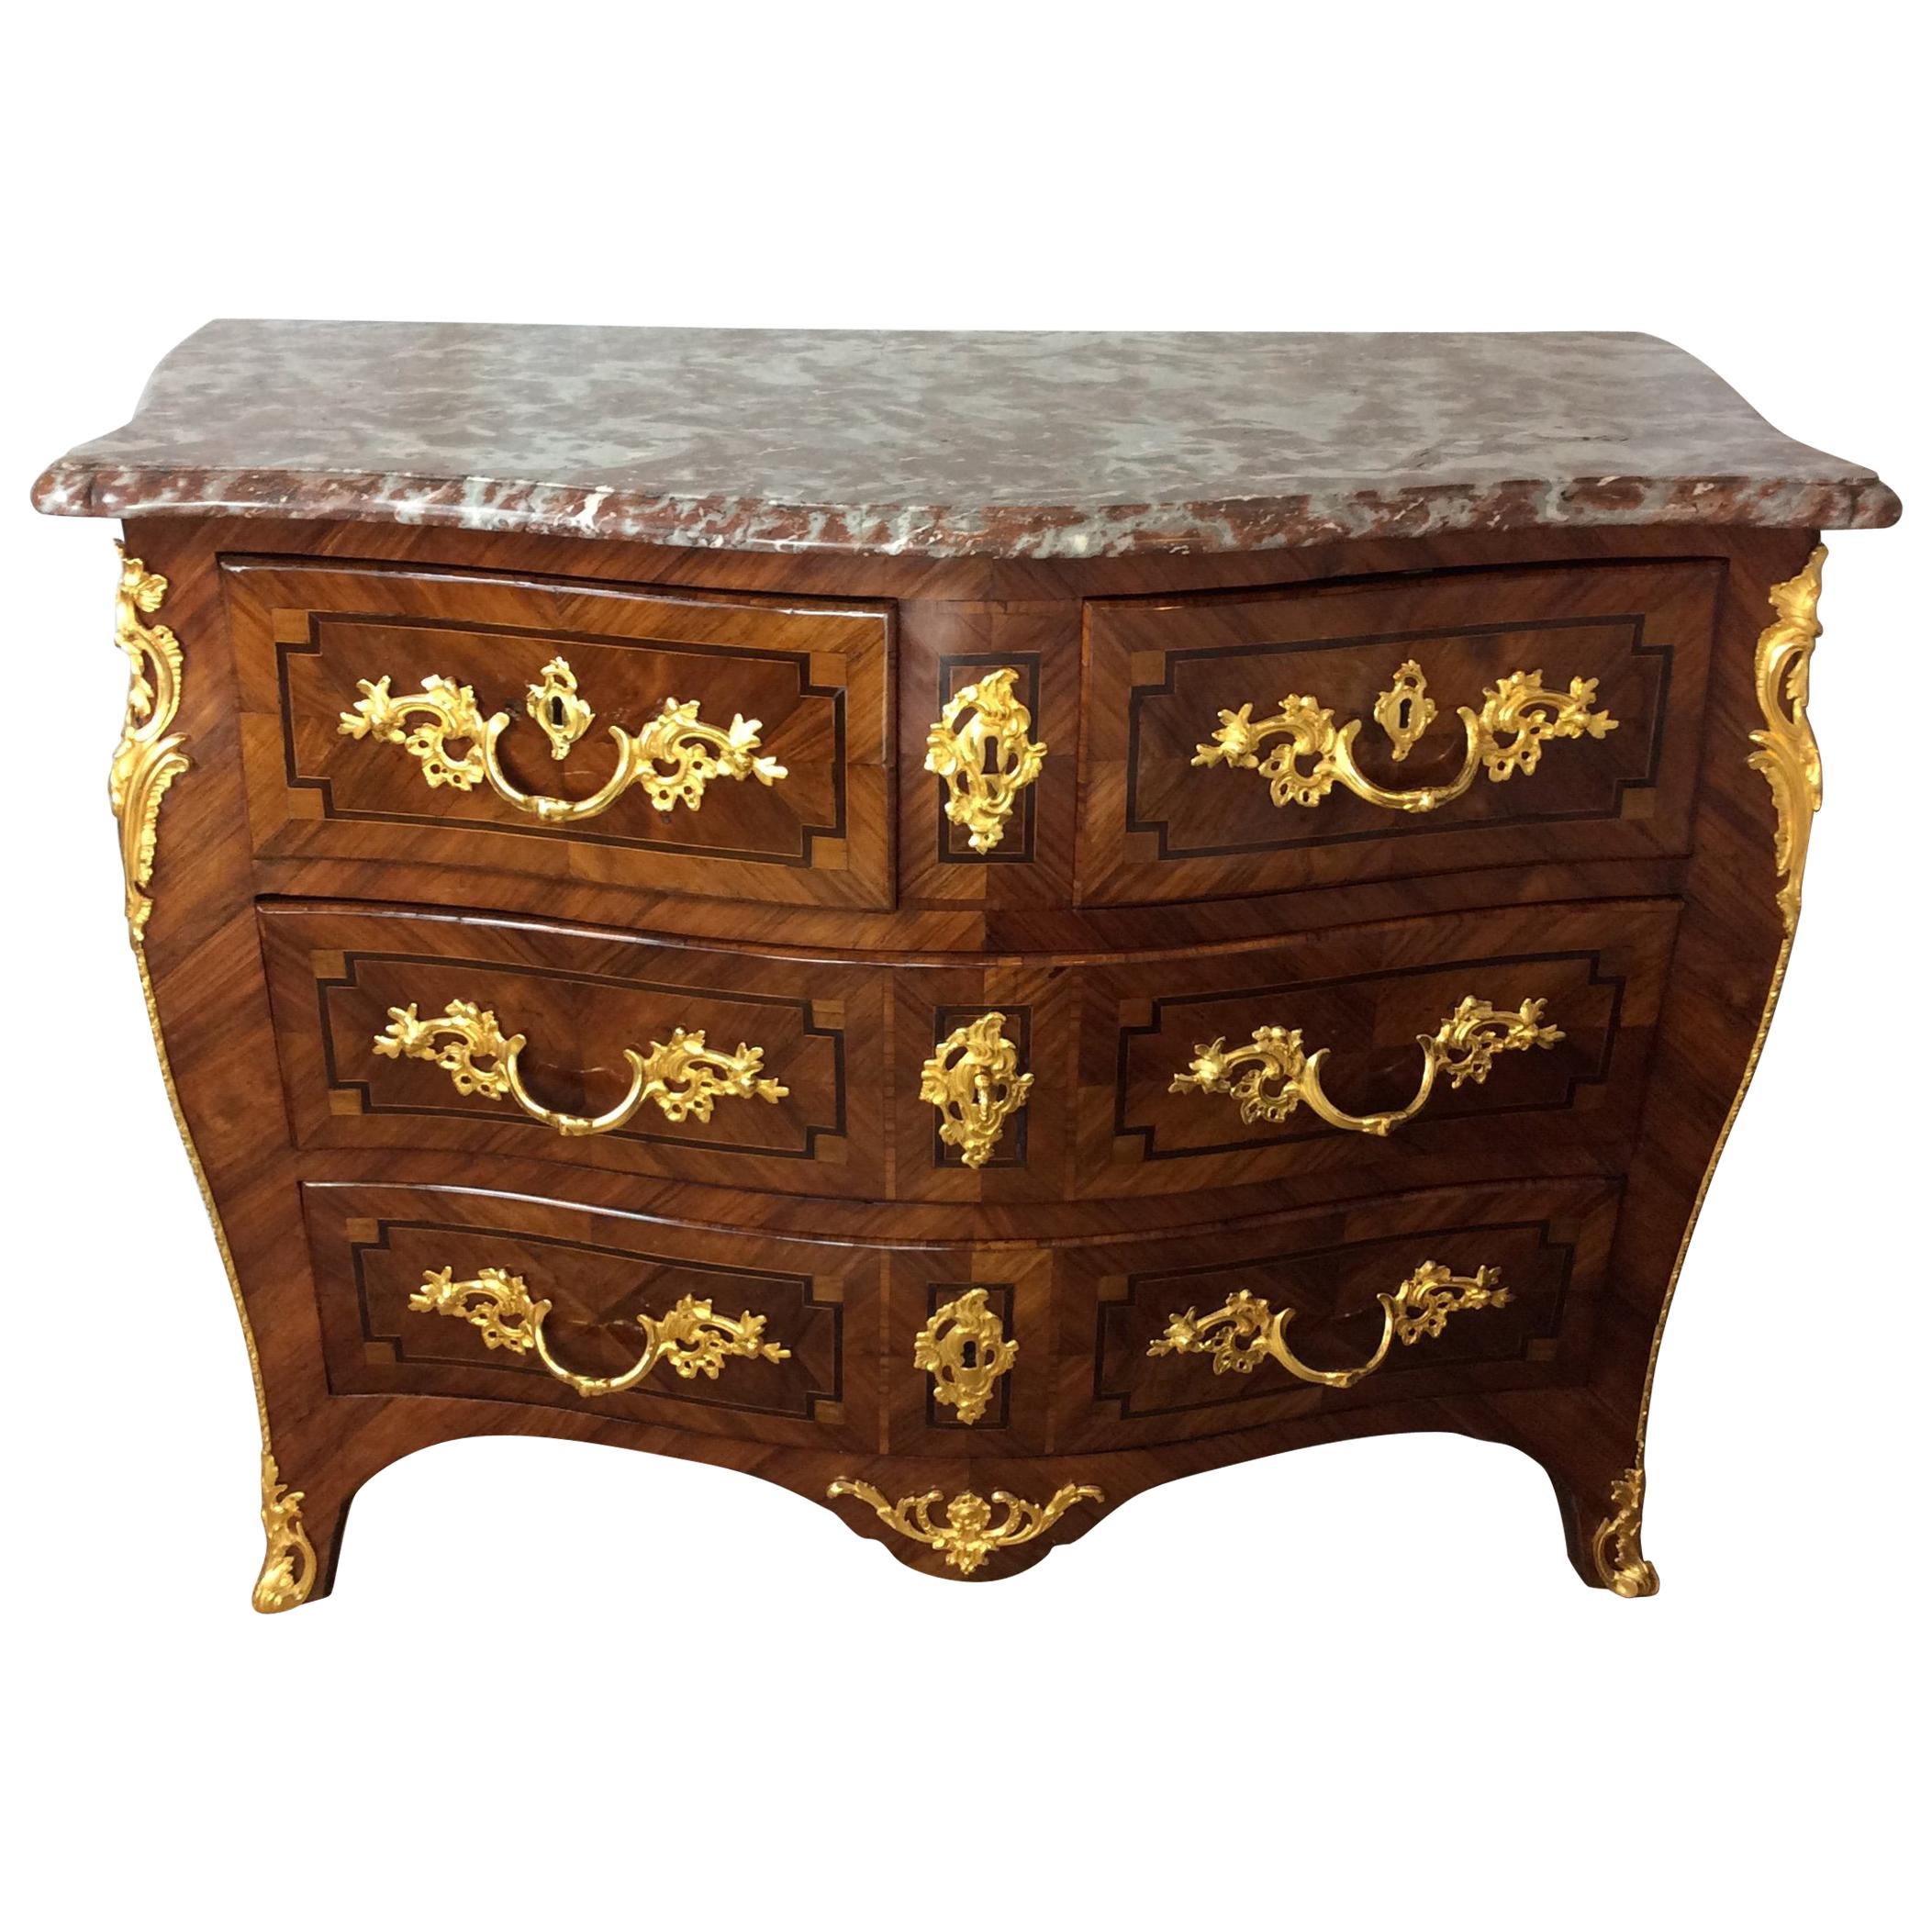 18th Century Louis XV Style Kingwood Commode Chest of Drawers by Pierre Roussel